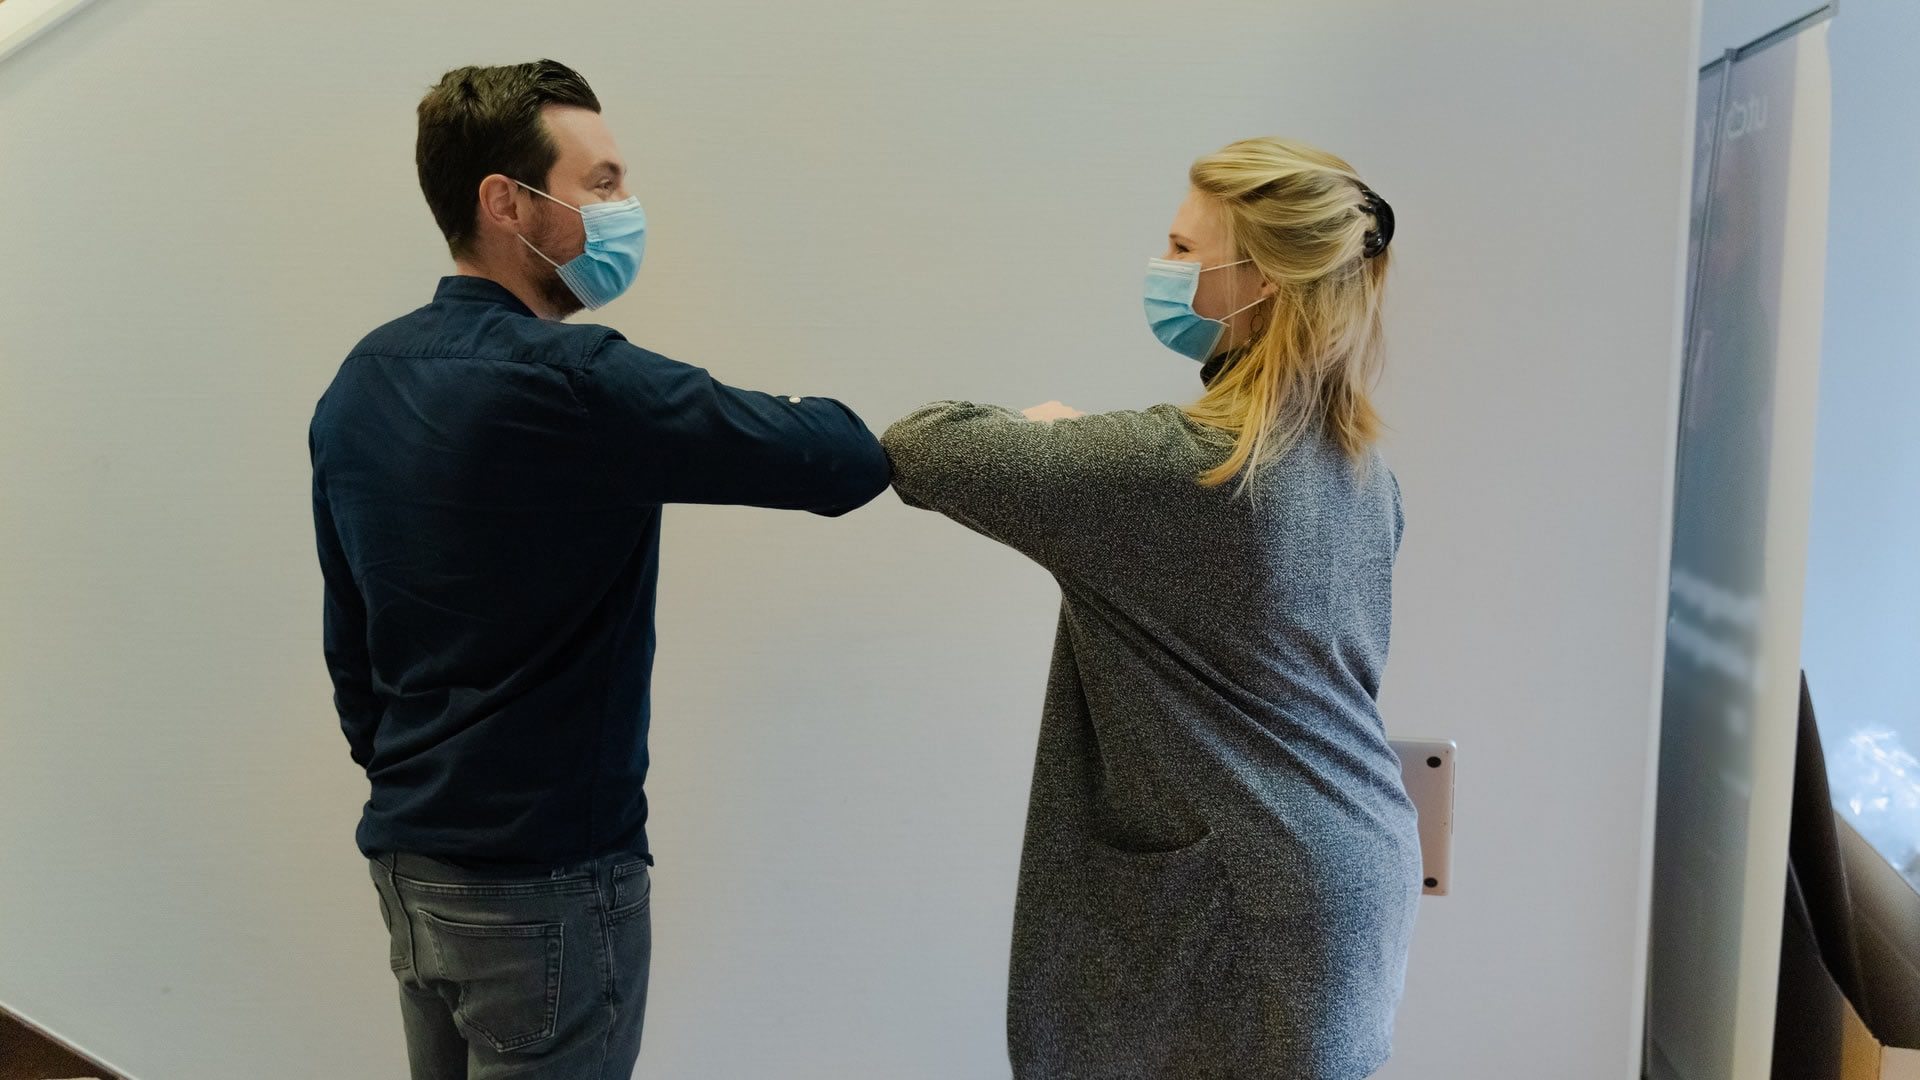 A man and a woman doing an elbow bump while wearing face masks.